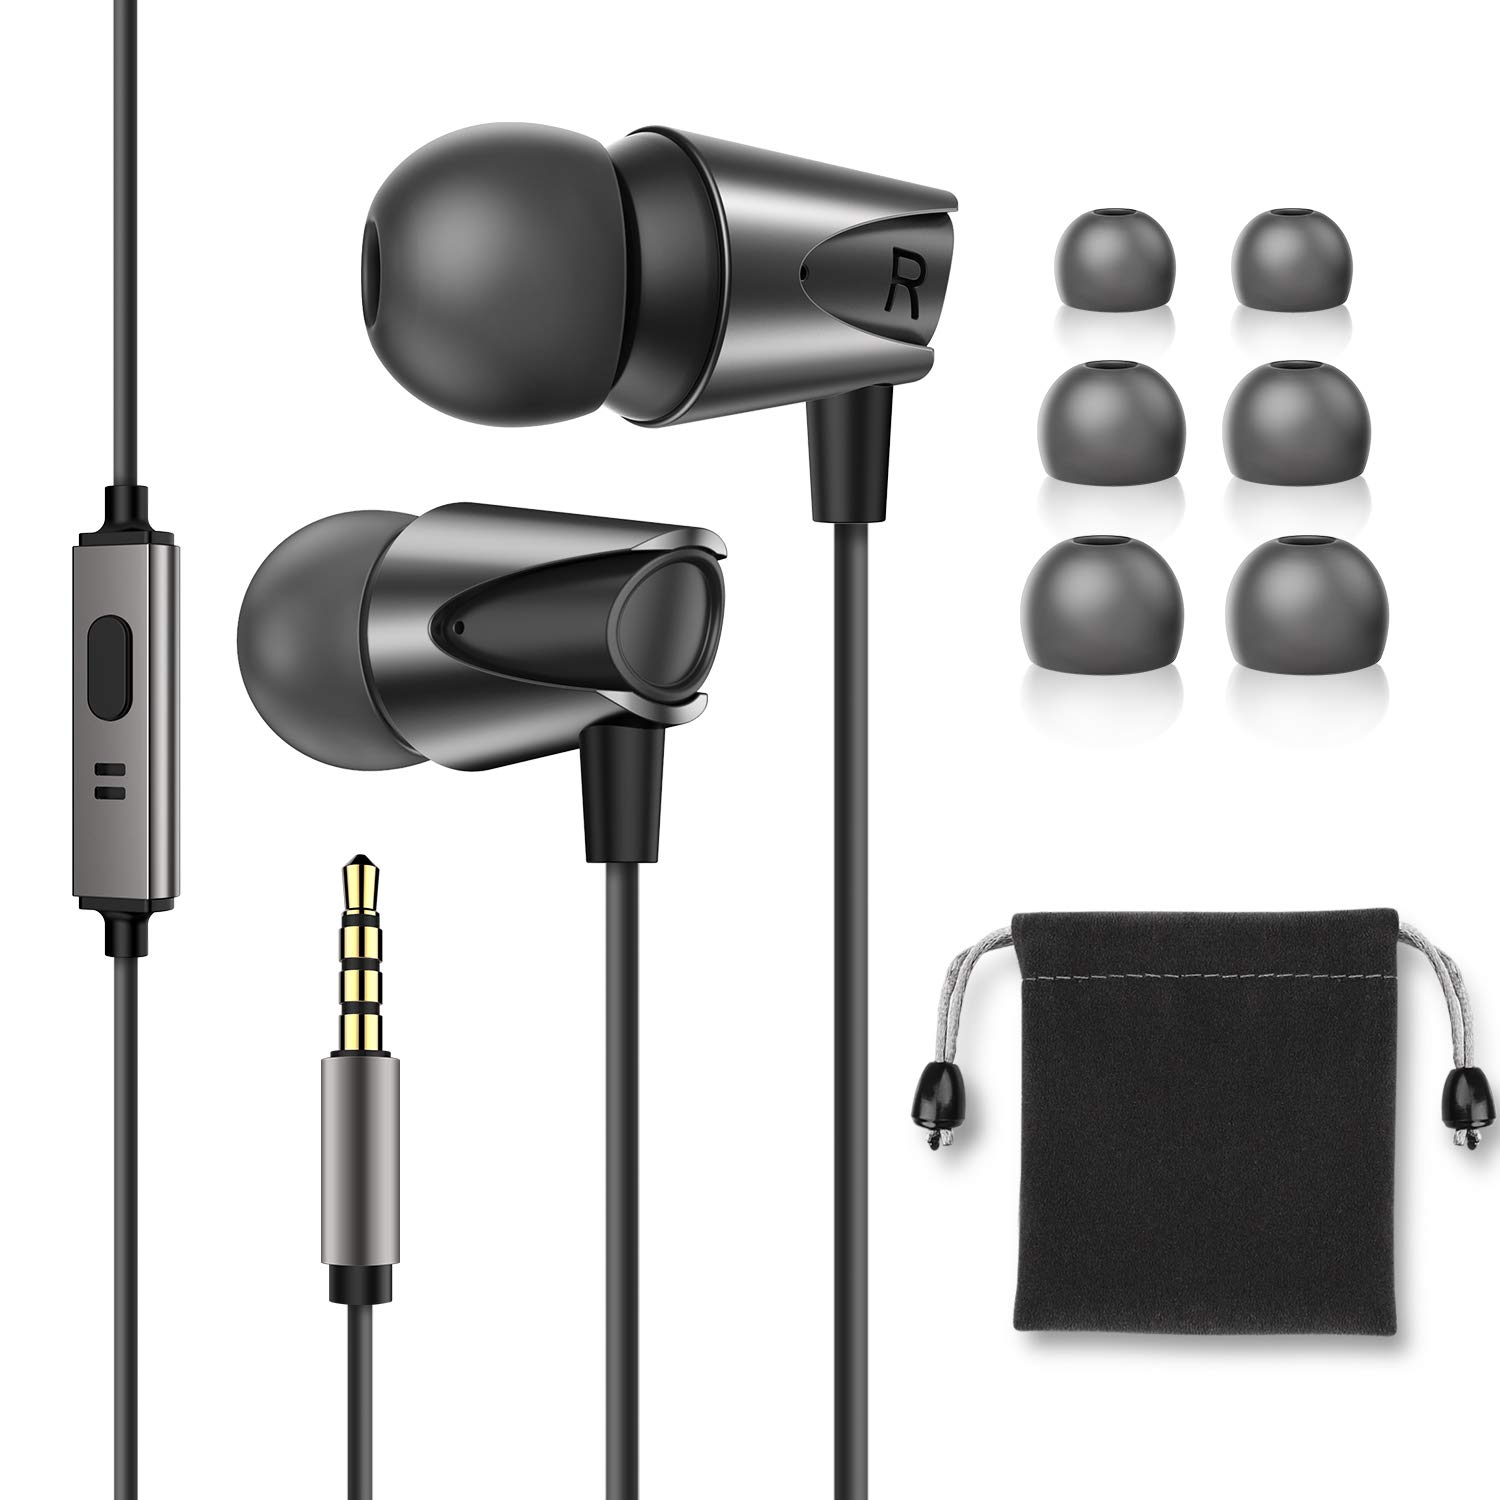 Book Cover in-Ear Headphones,Hi Res Stereo M17 Wired Earphones Comfortable Tangle Free Earbuds with Deep Bass for iPhone,iPod,Android Smartphones,MP3 Players,Tablets and All 3.5mm Audio Jack